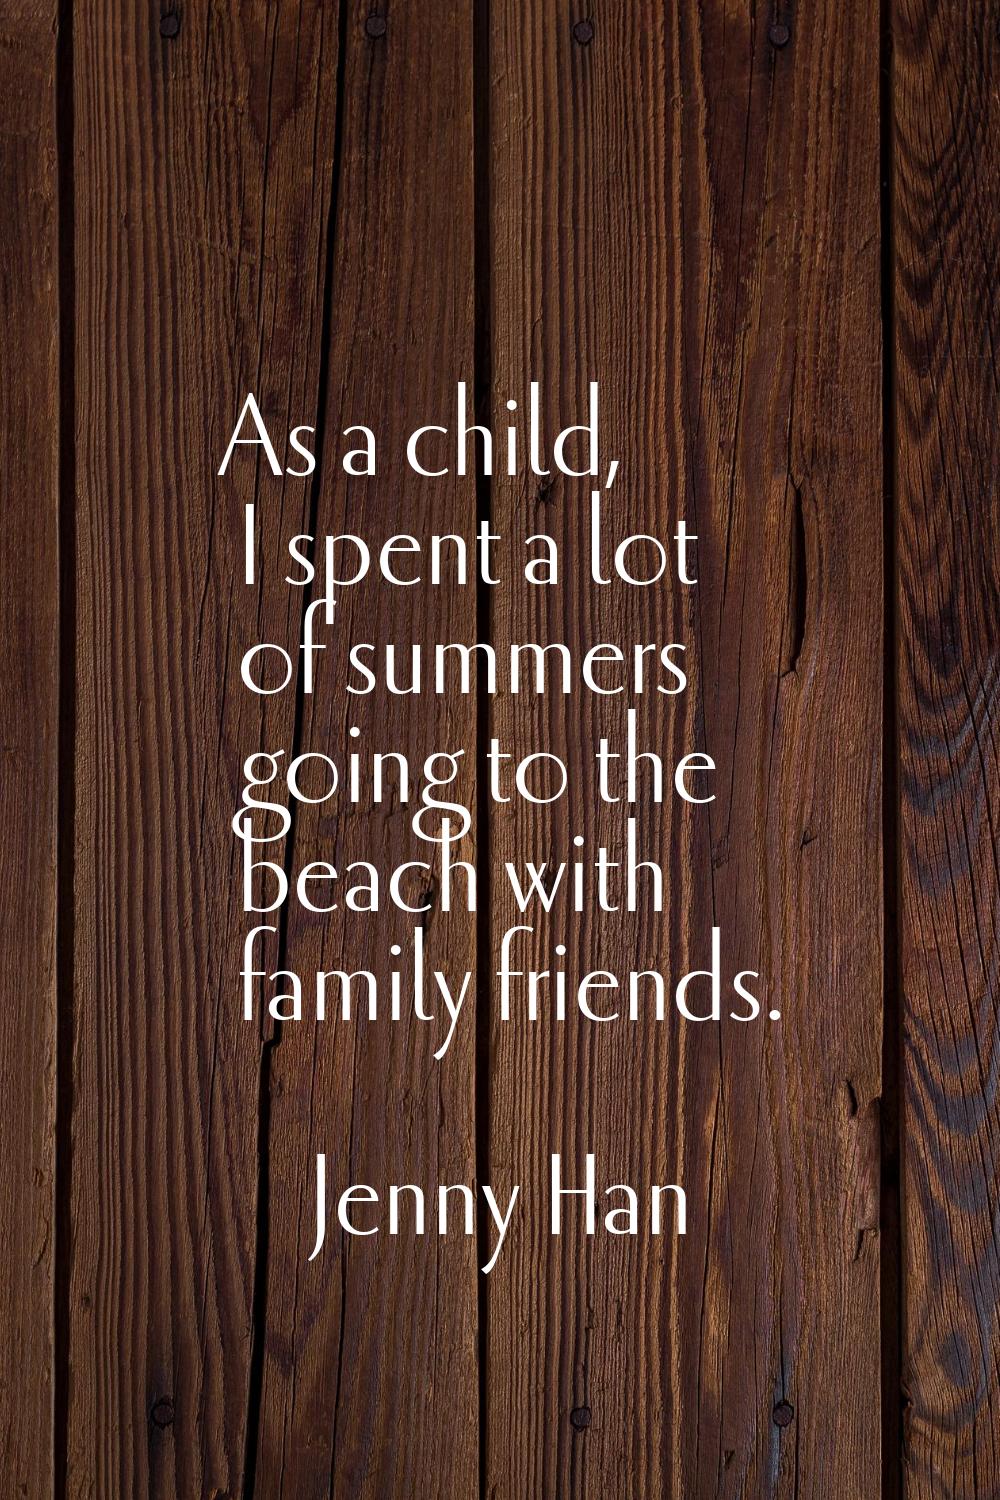 As a child, I spent a lot of summers going to the beach with family friends.